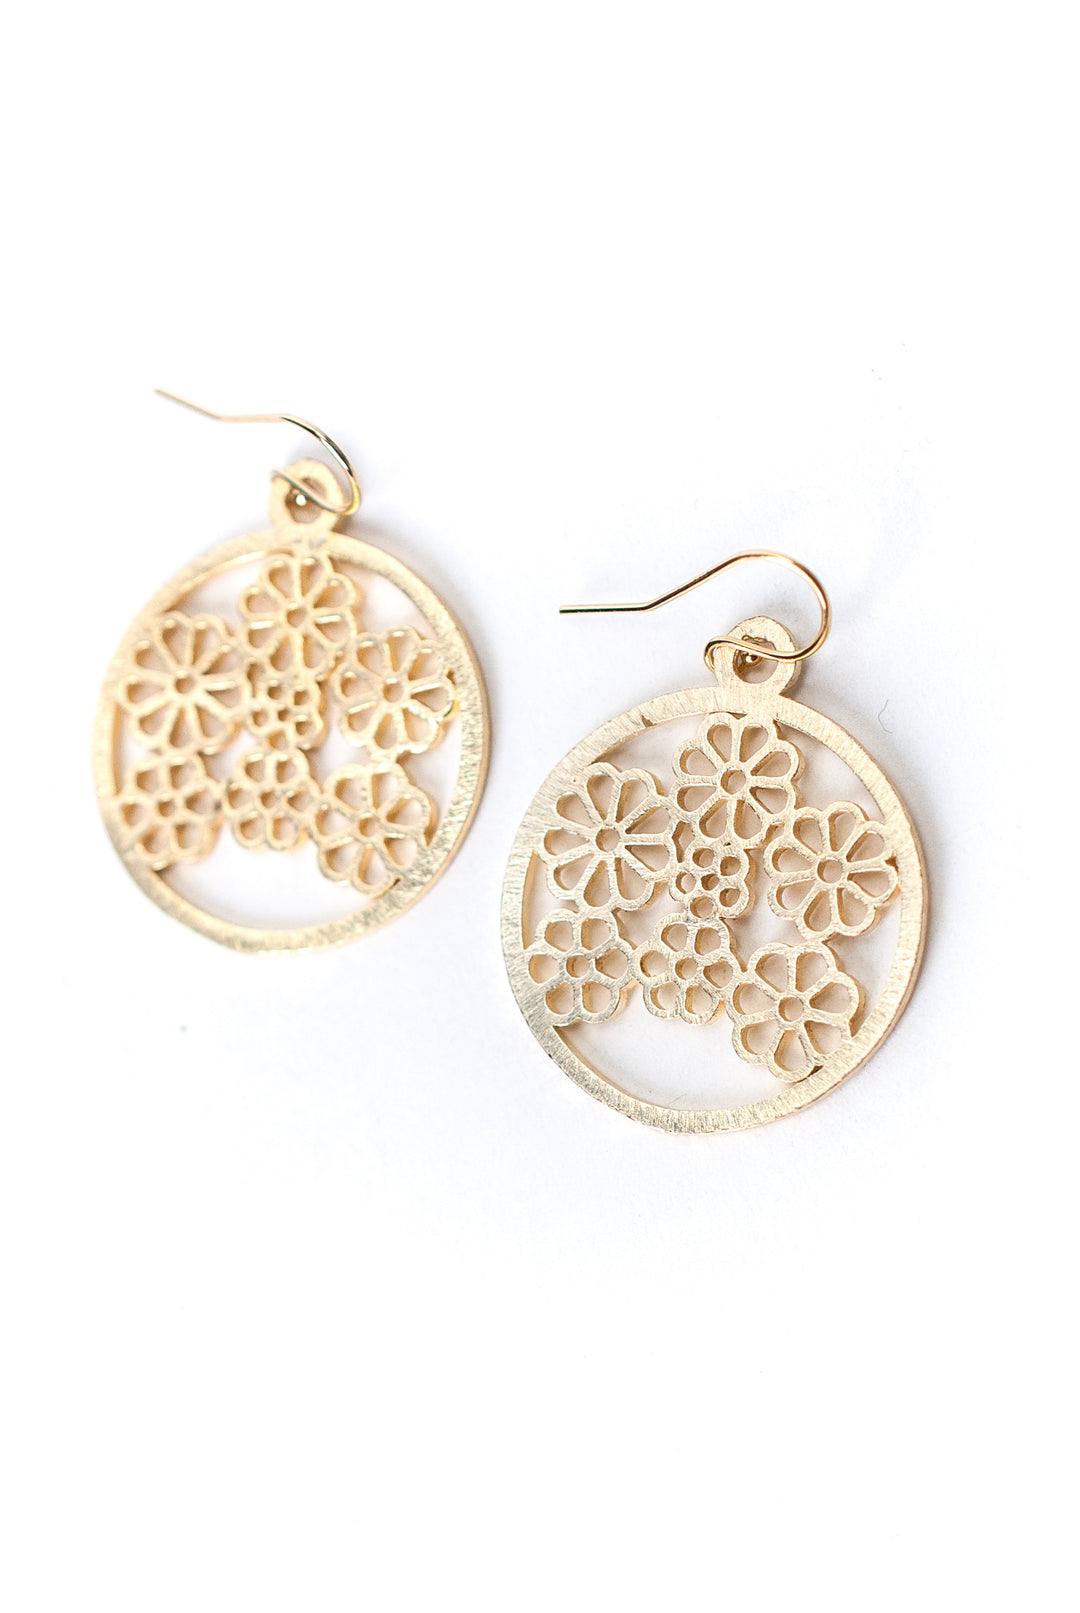 Brushed Gold Floral Collage Earrings